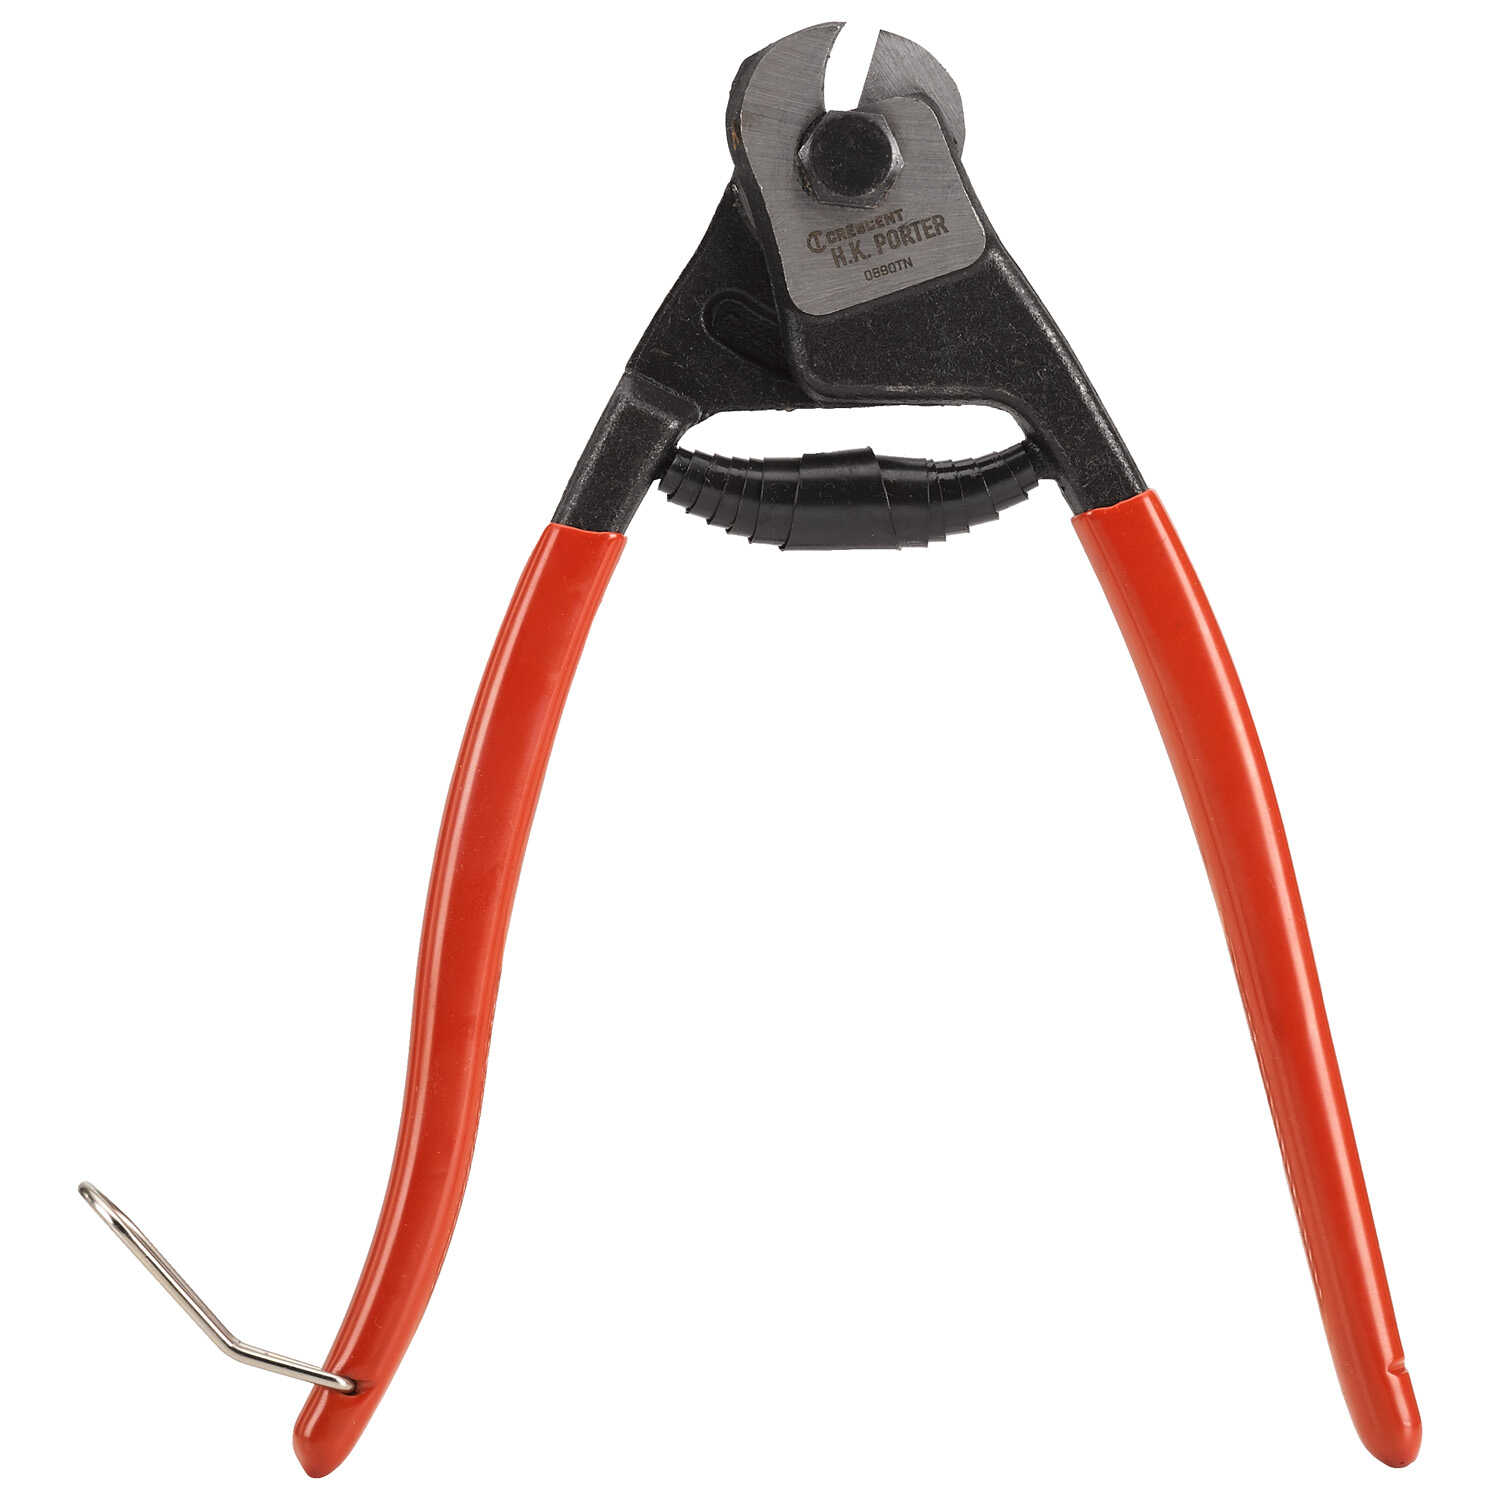 2 Pack Pocket Wire Rope /& Cable Cutters 7 1//2 in Shear Cut